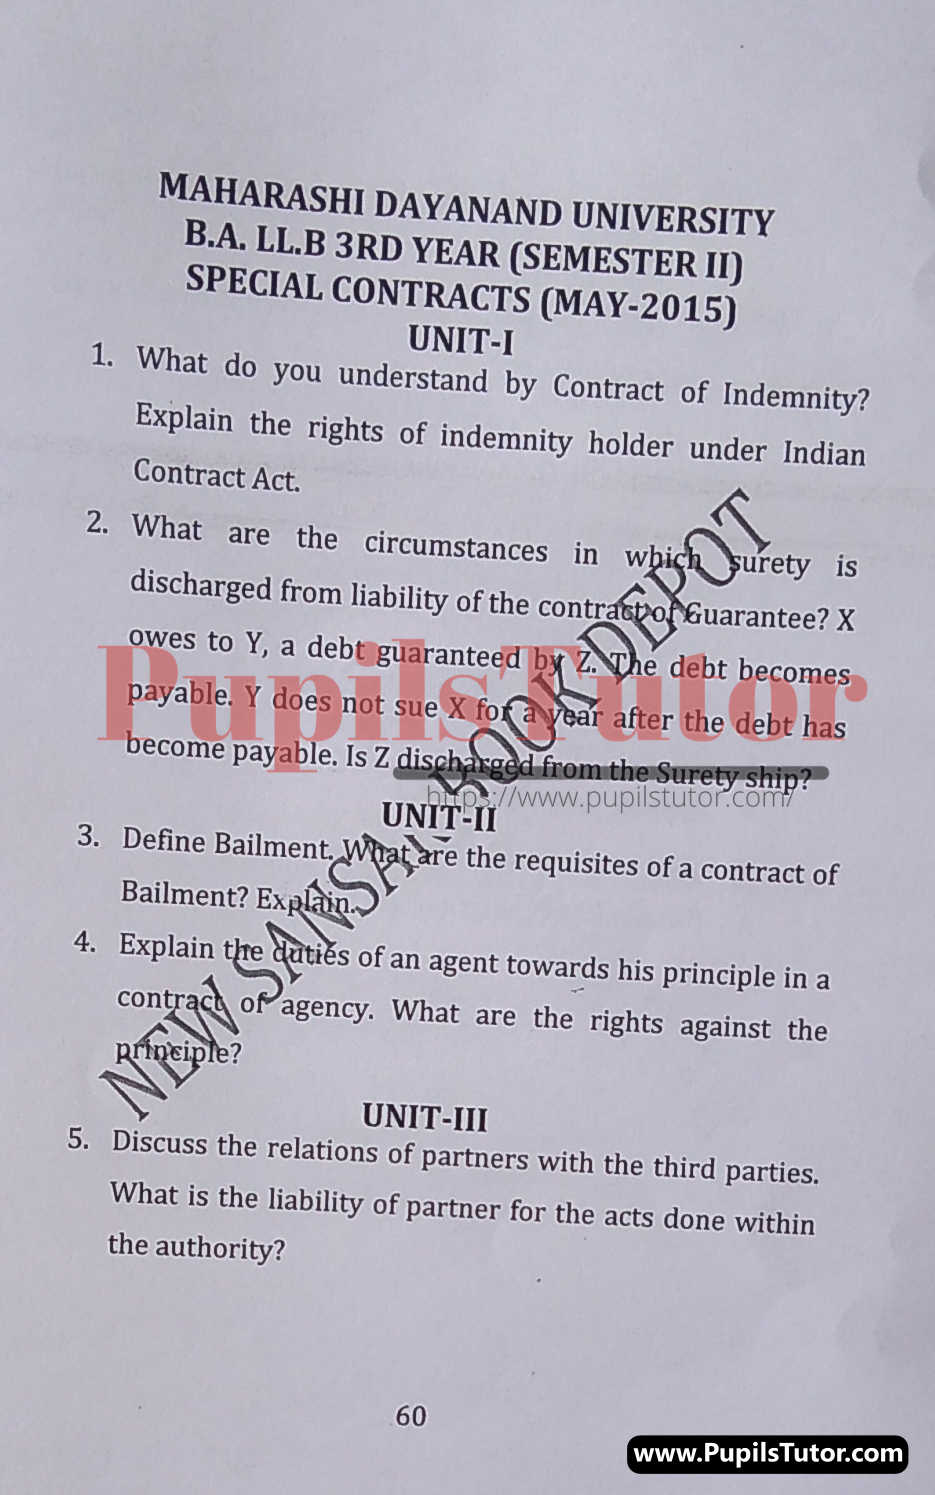 MDU (Maharshi Dayanand University, Rohtak Haryana) LLB Regular Exam (Hons.) Second Semester Previous Year Special Contracts Question Paper For May, 2015 Exam (Question Paper Page 1) - pupilstutor.com